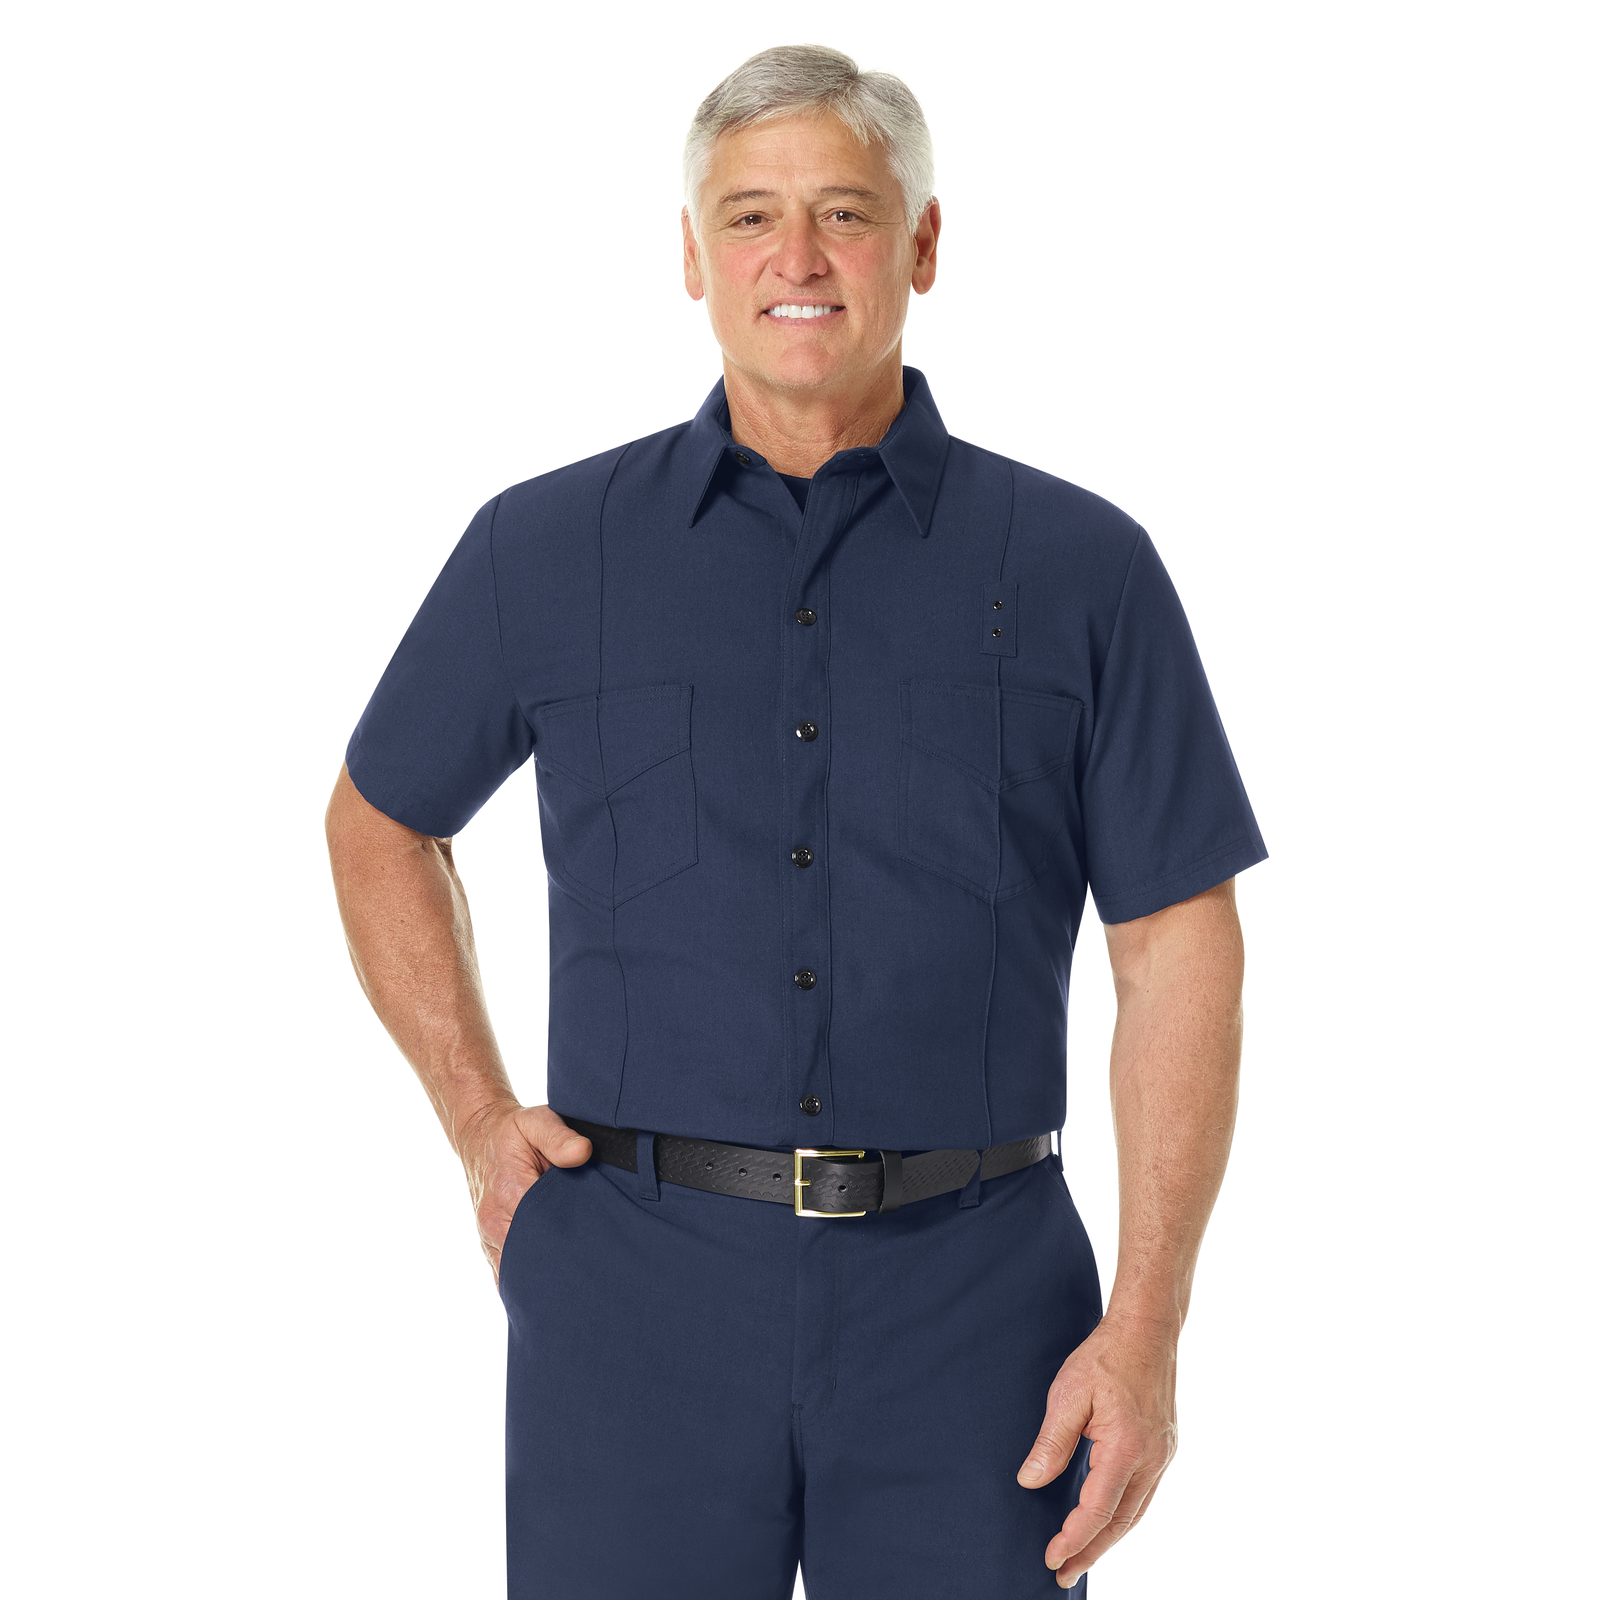 Made with durable, flame-resistant Nomex® IIIA fabric and autoclaved with our proprietary PerfectPress® process to give you a professional appearance that lasts. Featuring a Western-style yoke back.